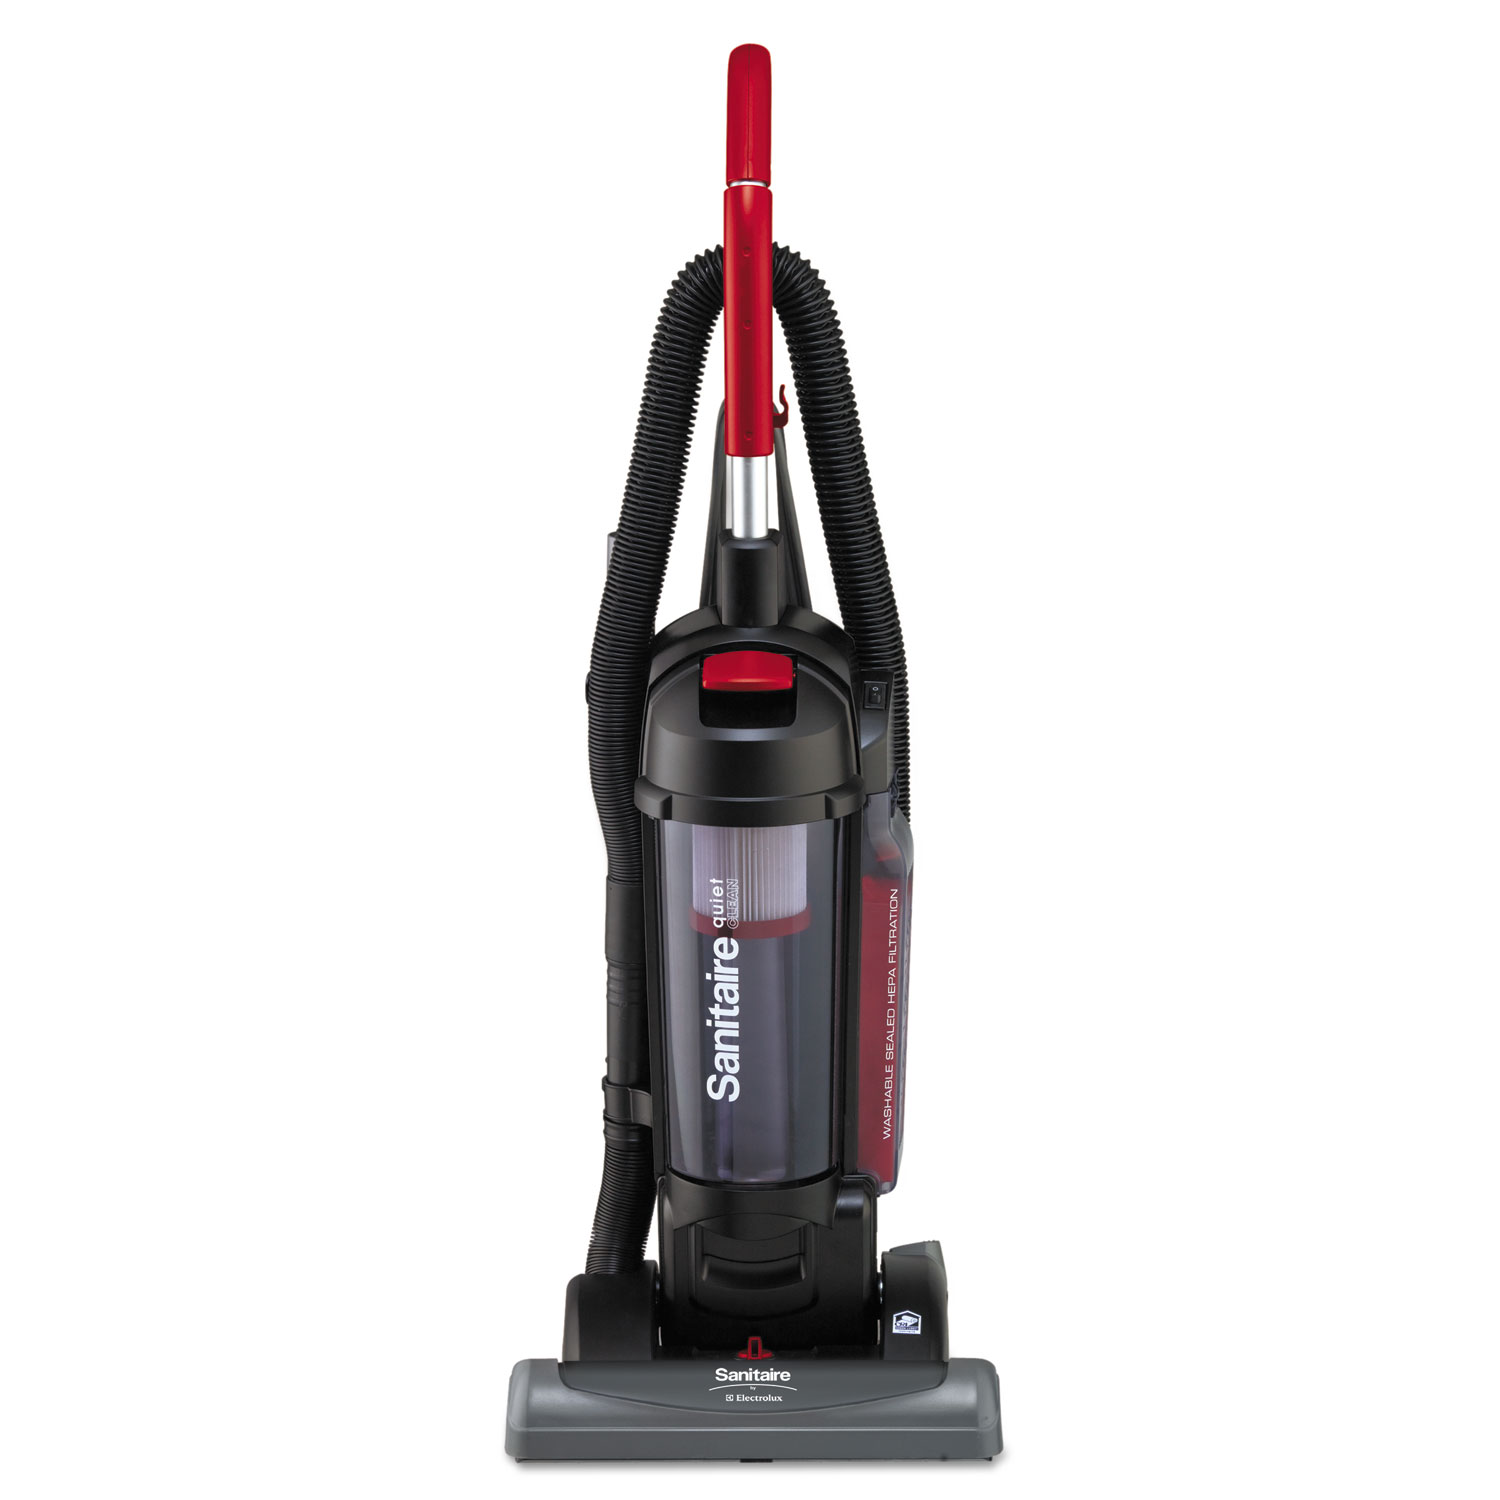  Sanitaire SC5845D FORCE QuietClean Upright Vacuum with Dust Cup and Sealed HEPA Filtration, Black (EURSC5845D) 